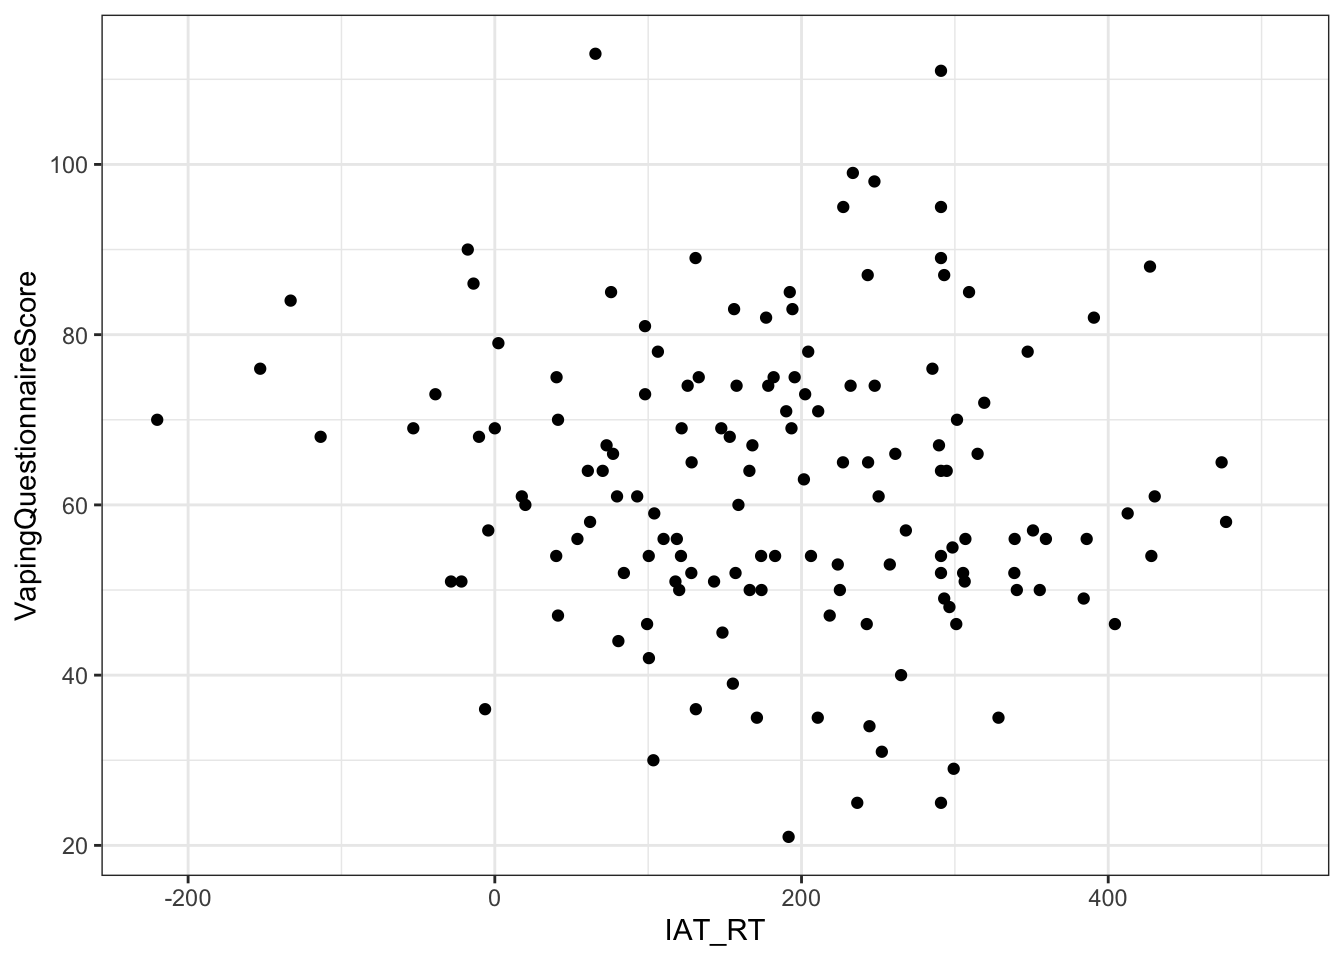 A scatterplot showing the relationship between implicit IAT reaction times (x) and explicit Vaping Questionnaire Scores (y)